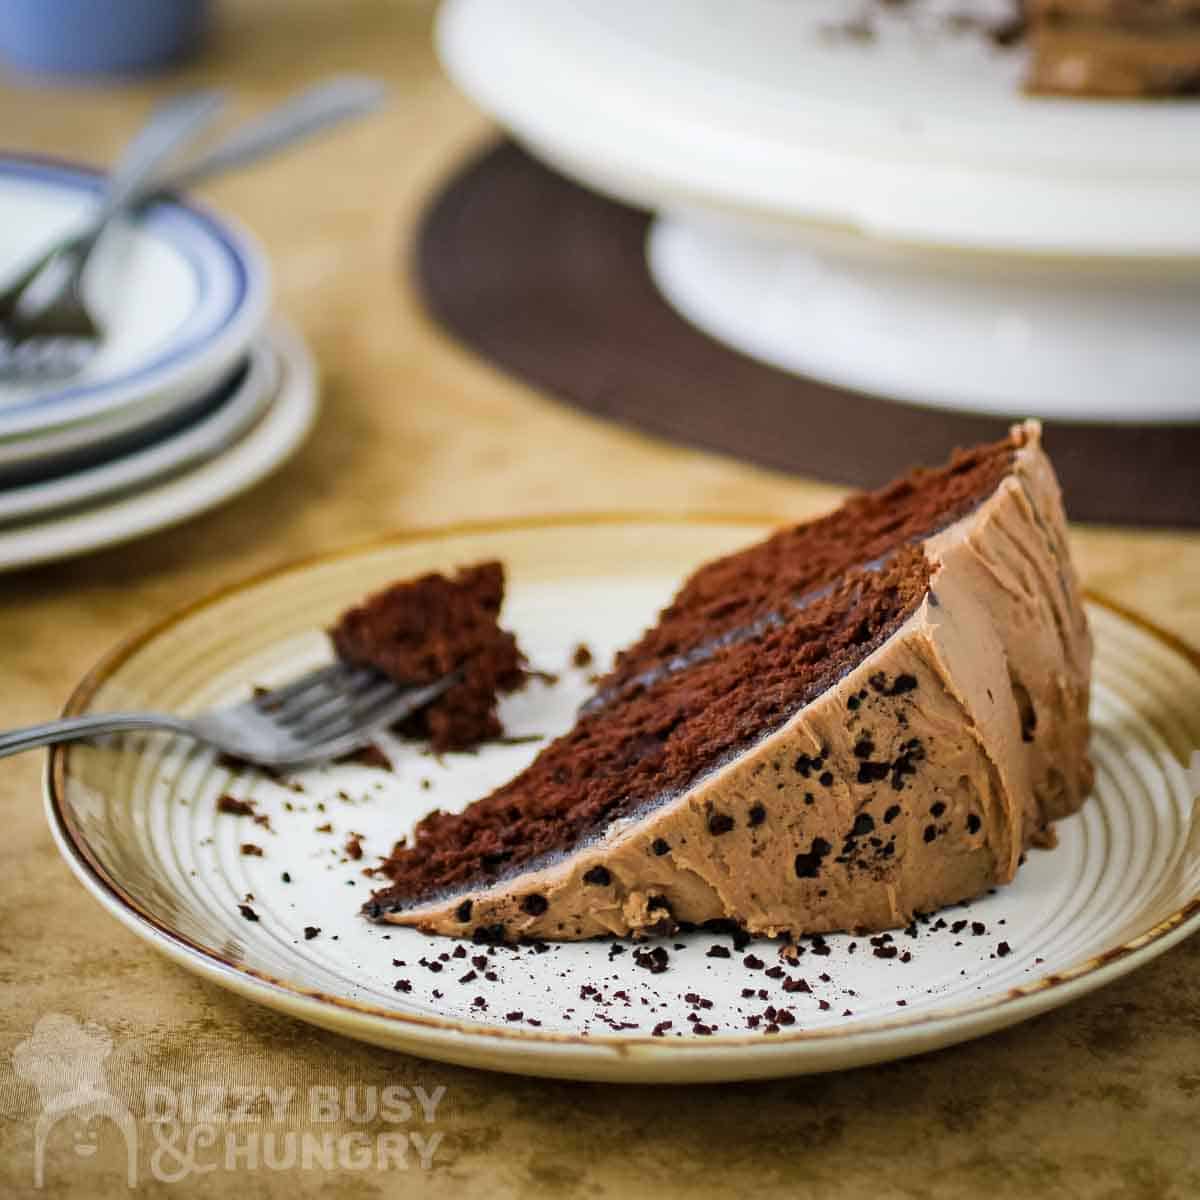 Side view of a slice of hazelnut cake on a white and brown plate with a fork on the side and more plates stacked in the background.